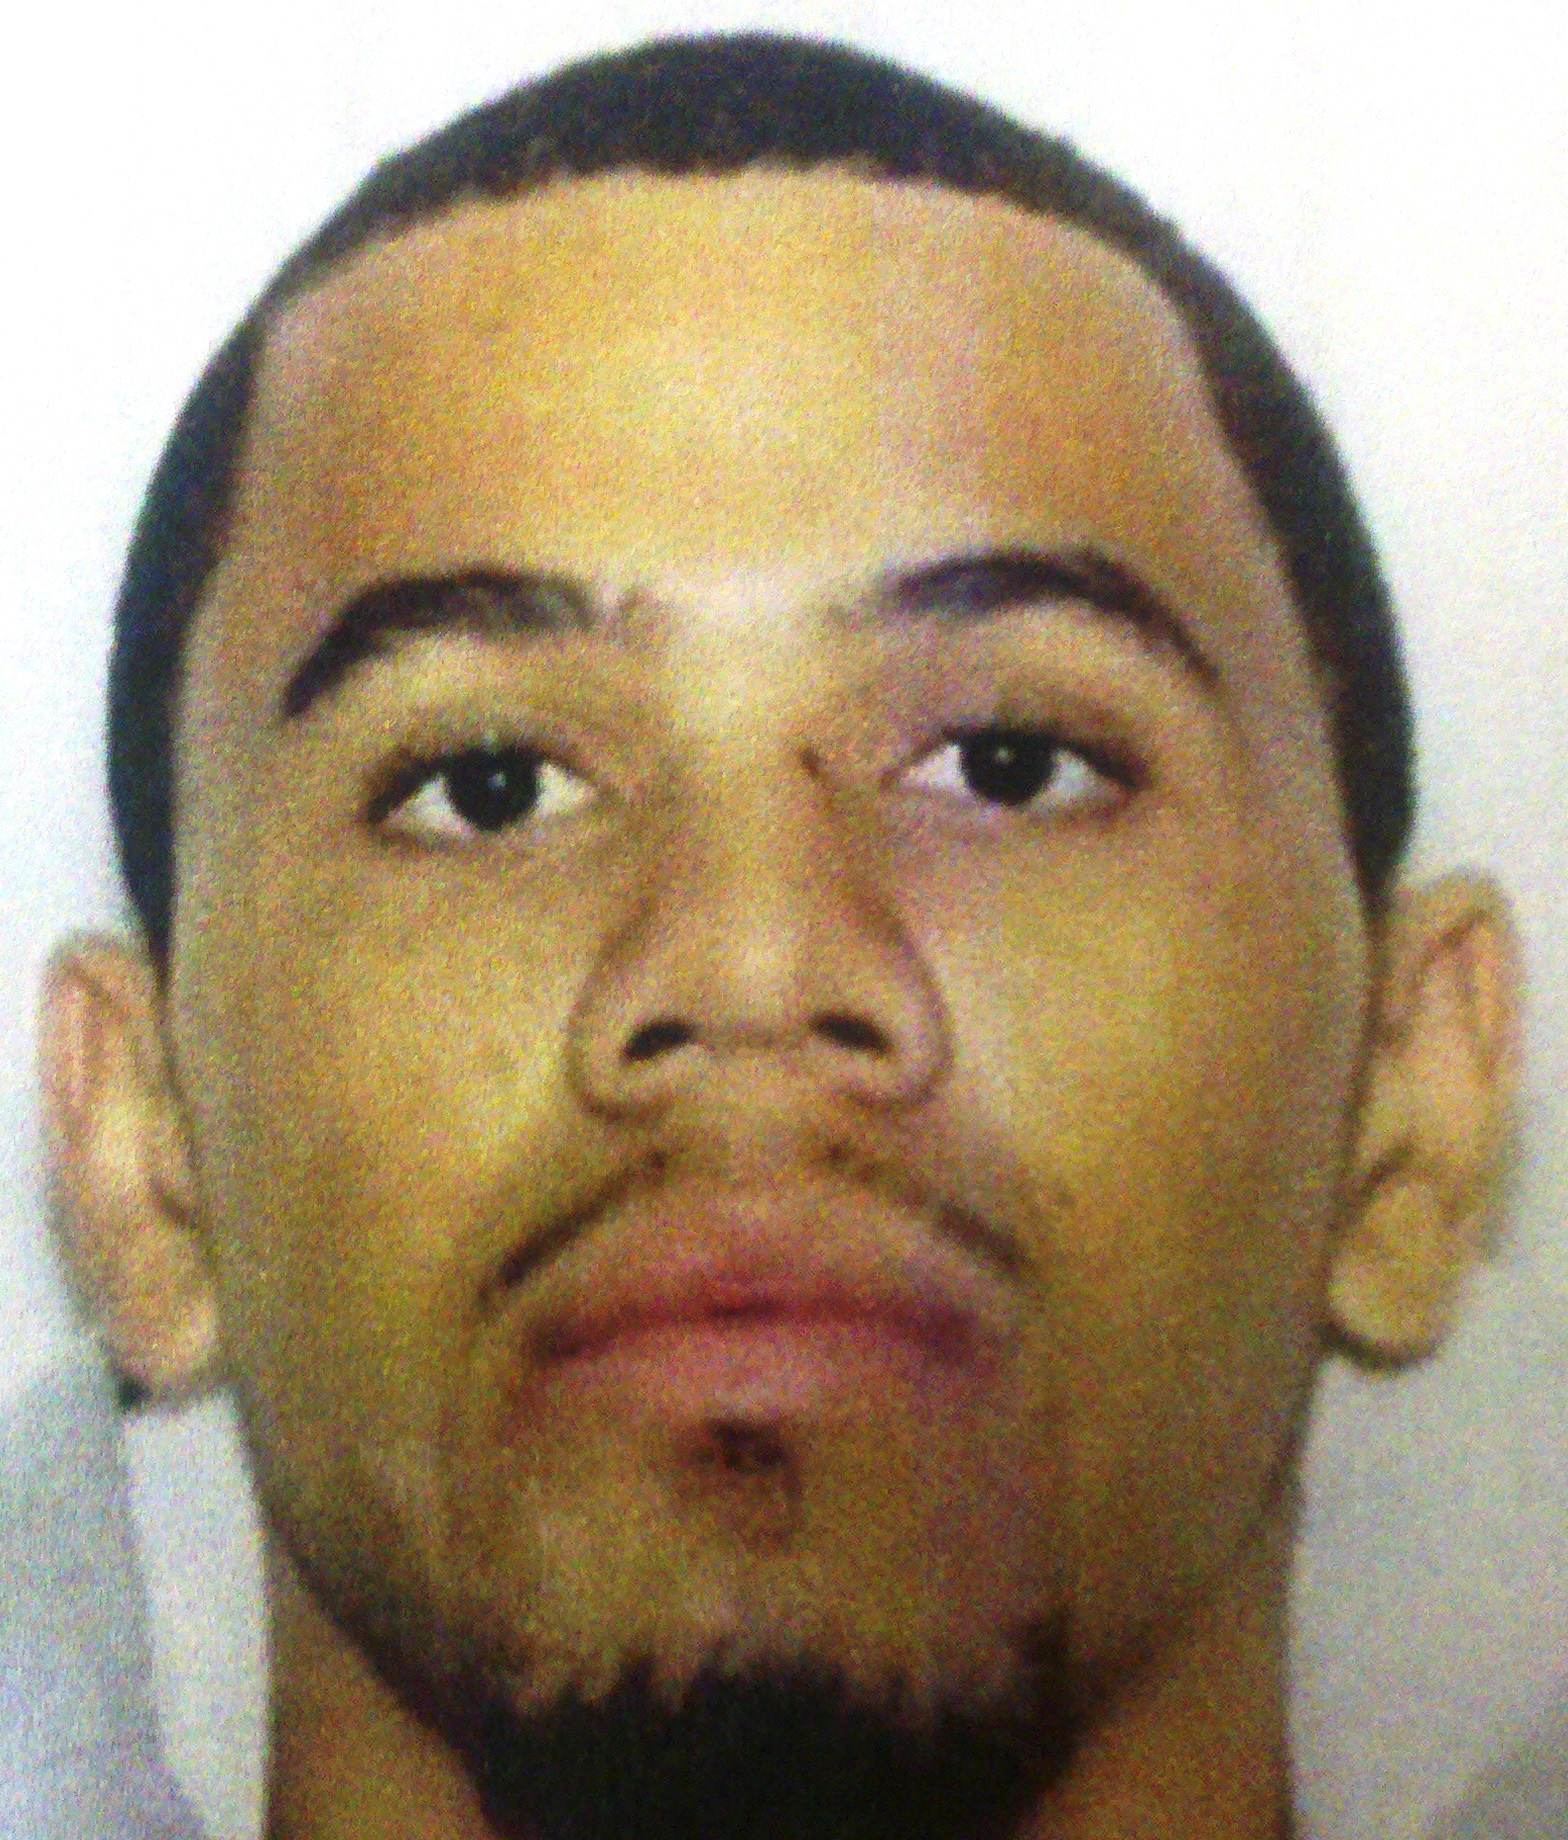 Police are looking for Shaquille Fuller, 21, in the fatal shooting of Shemrod Isaac on Monday.